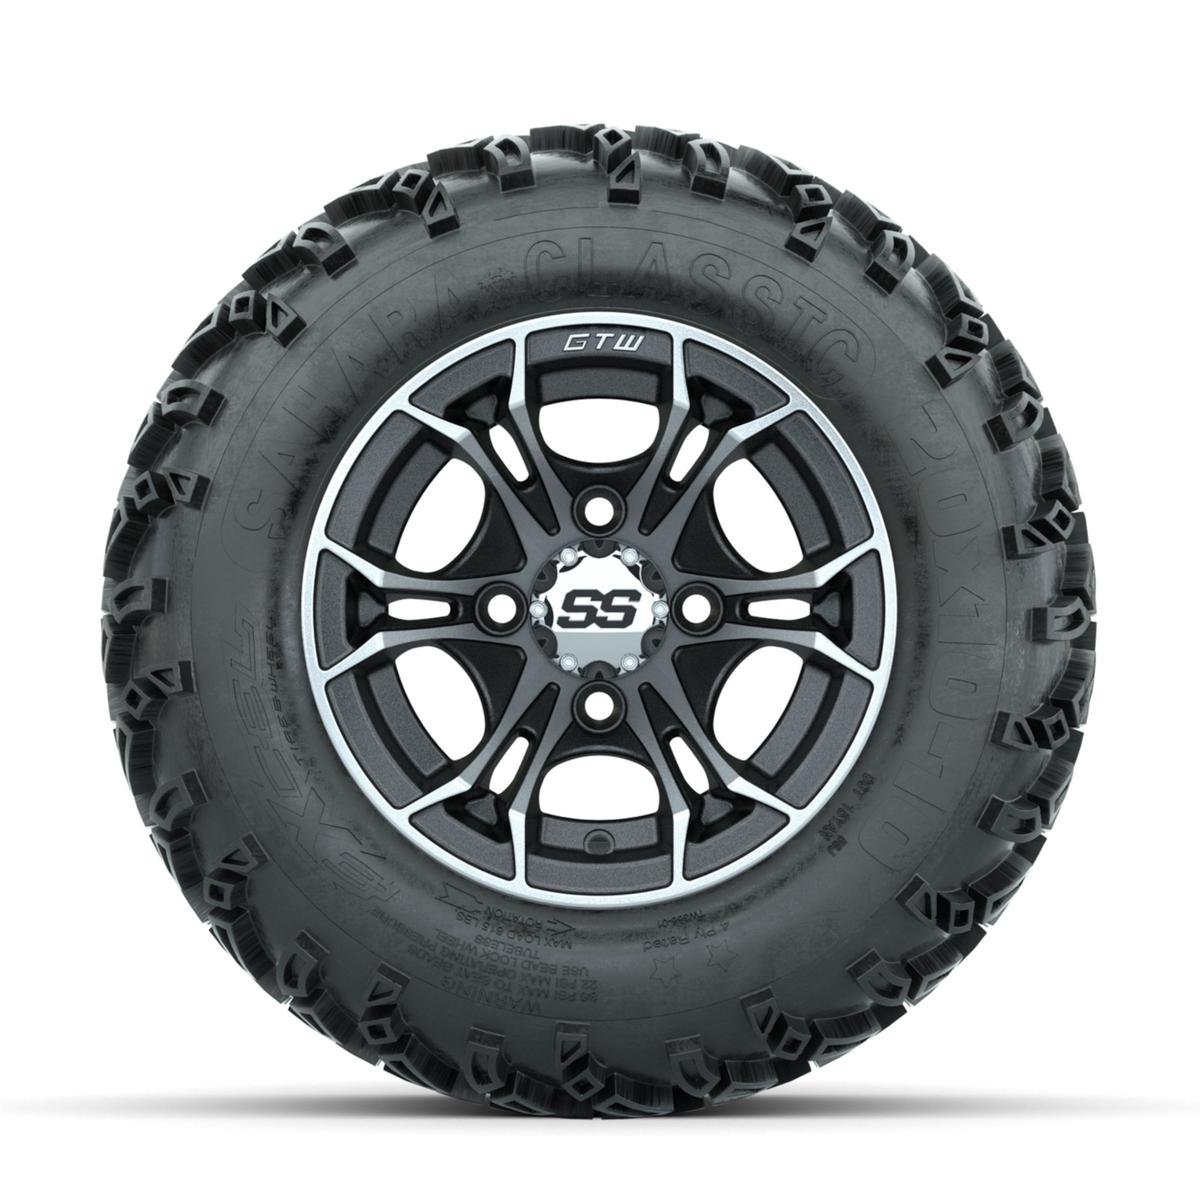 GTW Spyder Machined/Matte Grey 10 in Wheels with 20x10-10 Sahara Classic All Terrain Tires – Full Set